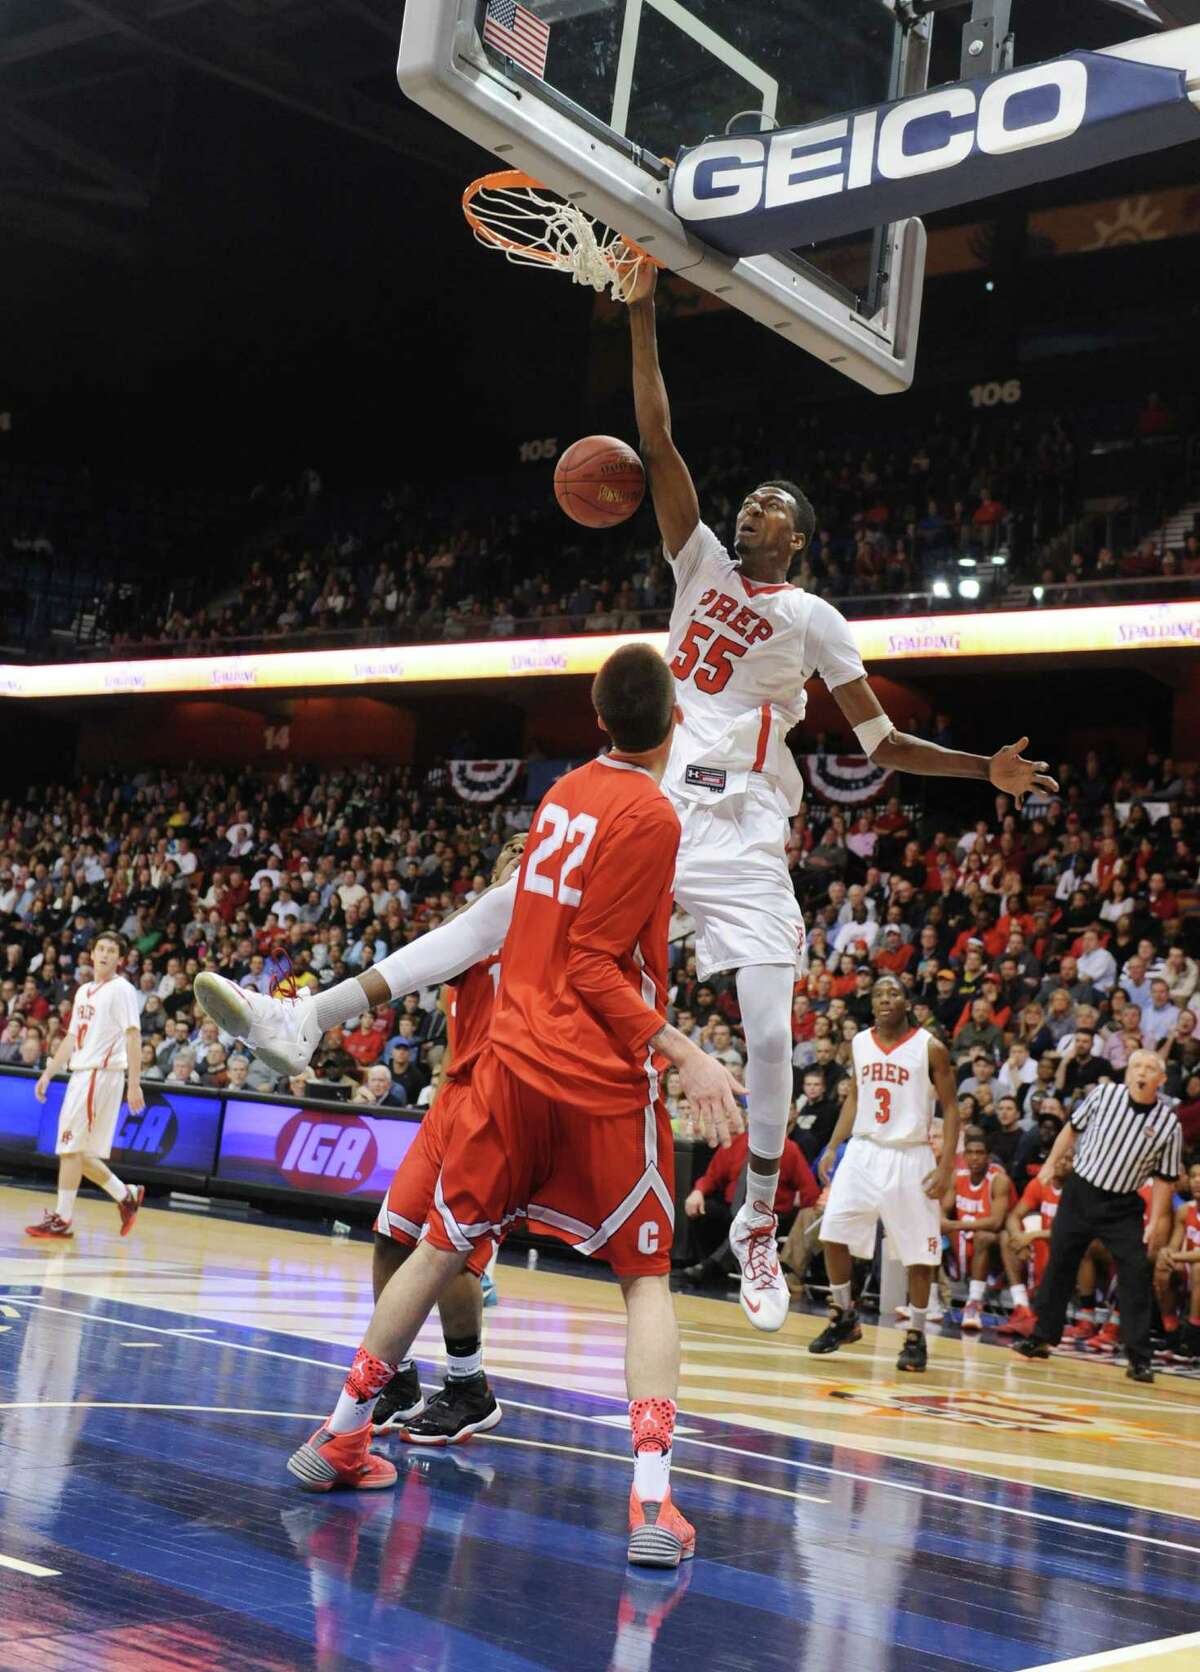 Fairfield Prep's Paschal Chukwu (55) dunks over Bridgeport Central's Orhan Cecunjamin (22) in the CIAC Class LL high school boys basketball state championship game between No. 1 Fairfield Prep. and No. 2 Bridgeport Central at Mohegan Sun Arena in Uncasville, Conn. on Saturday, March 22, 2014.